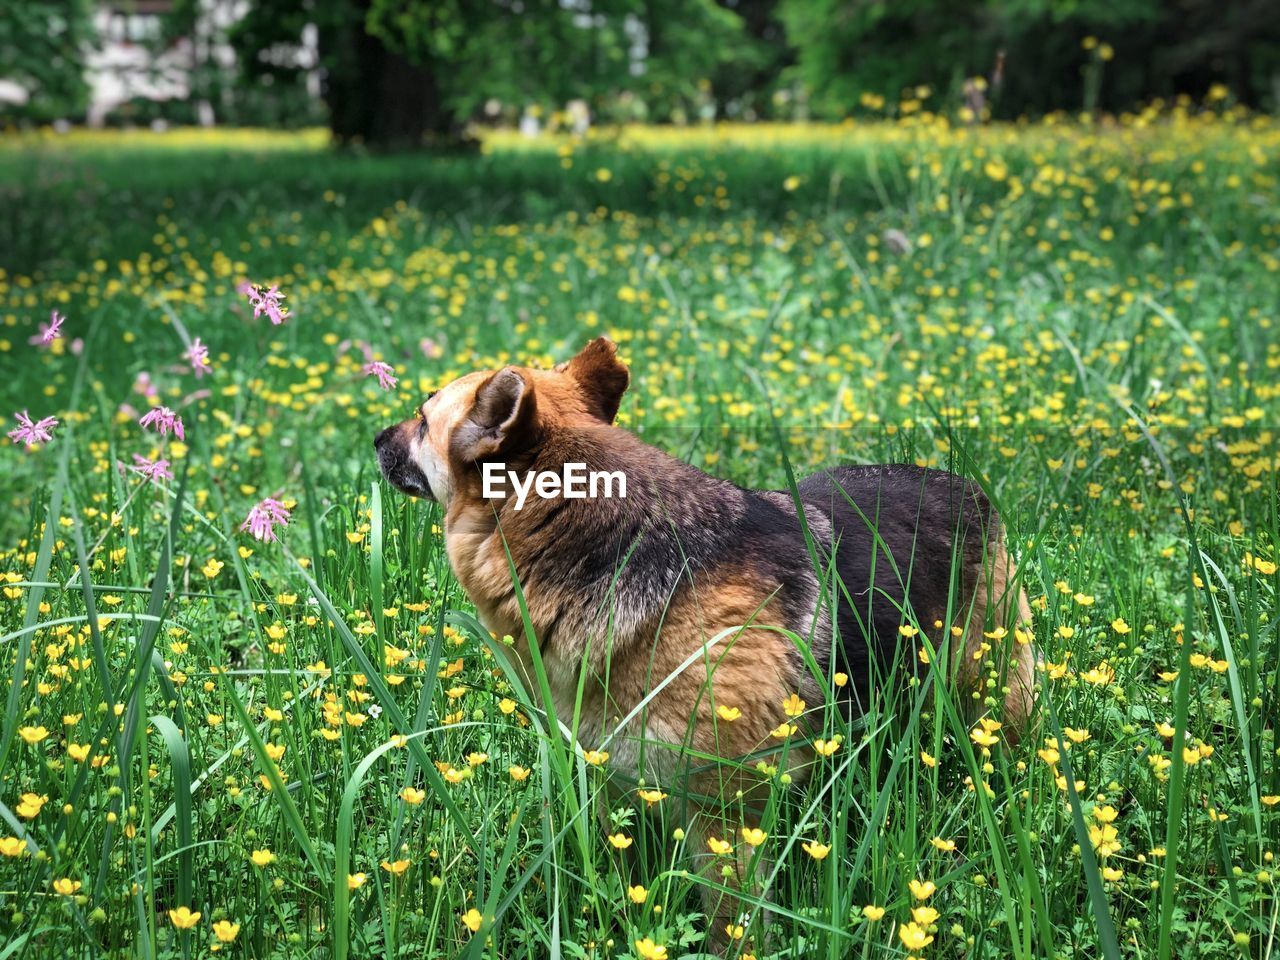 German shepherd dog surrounded by flowers growing in a forest during summer